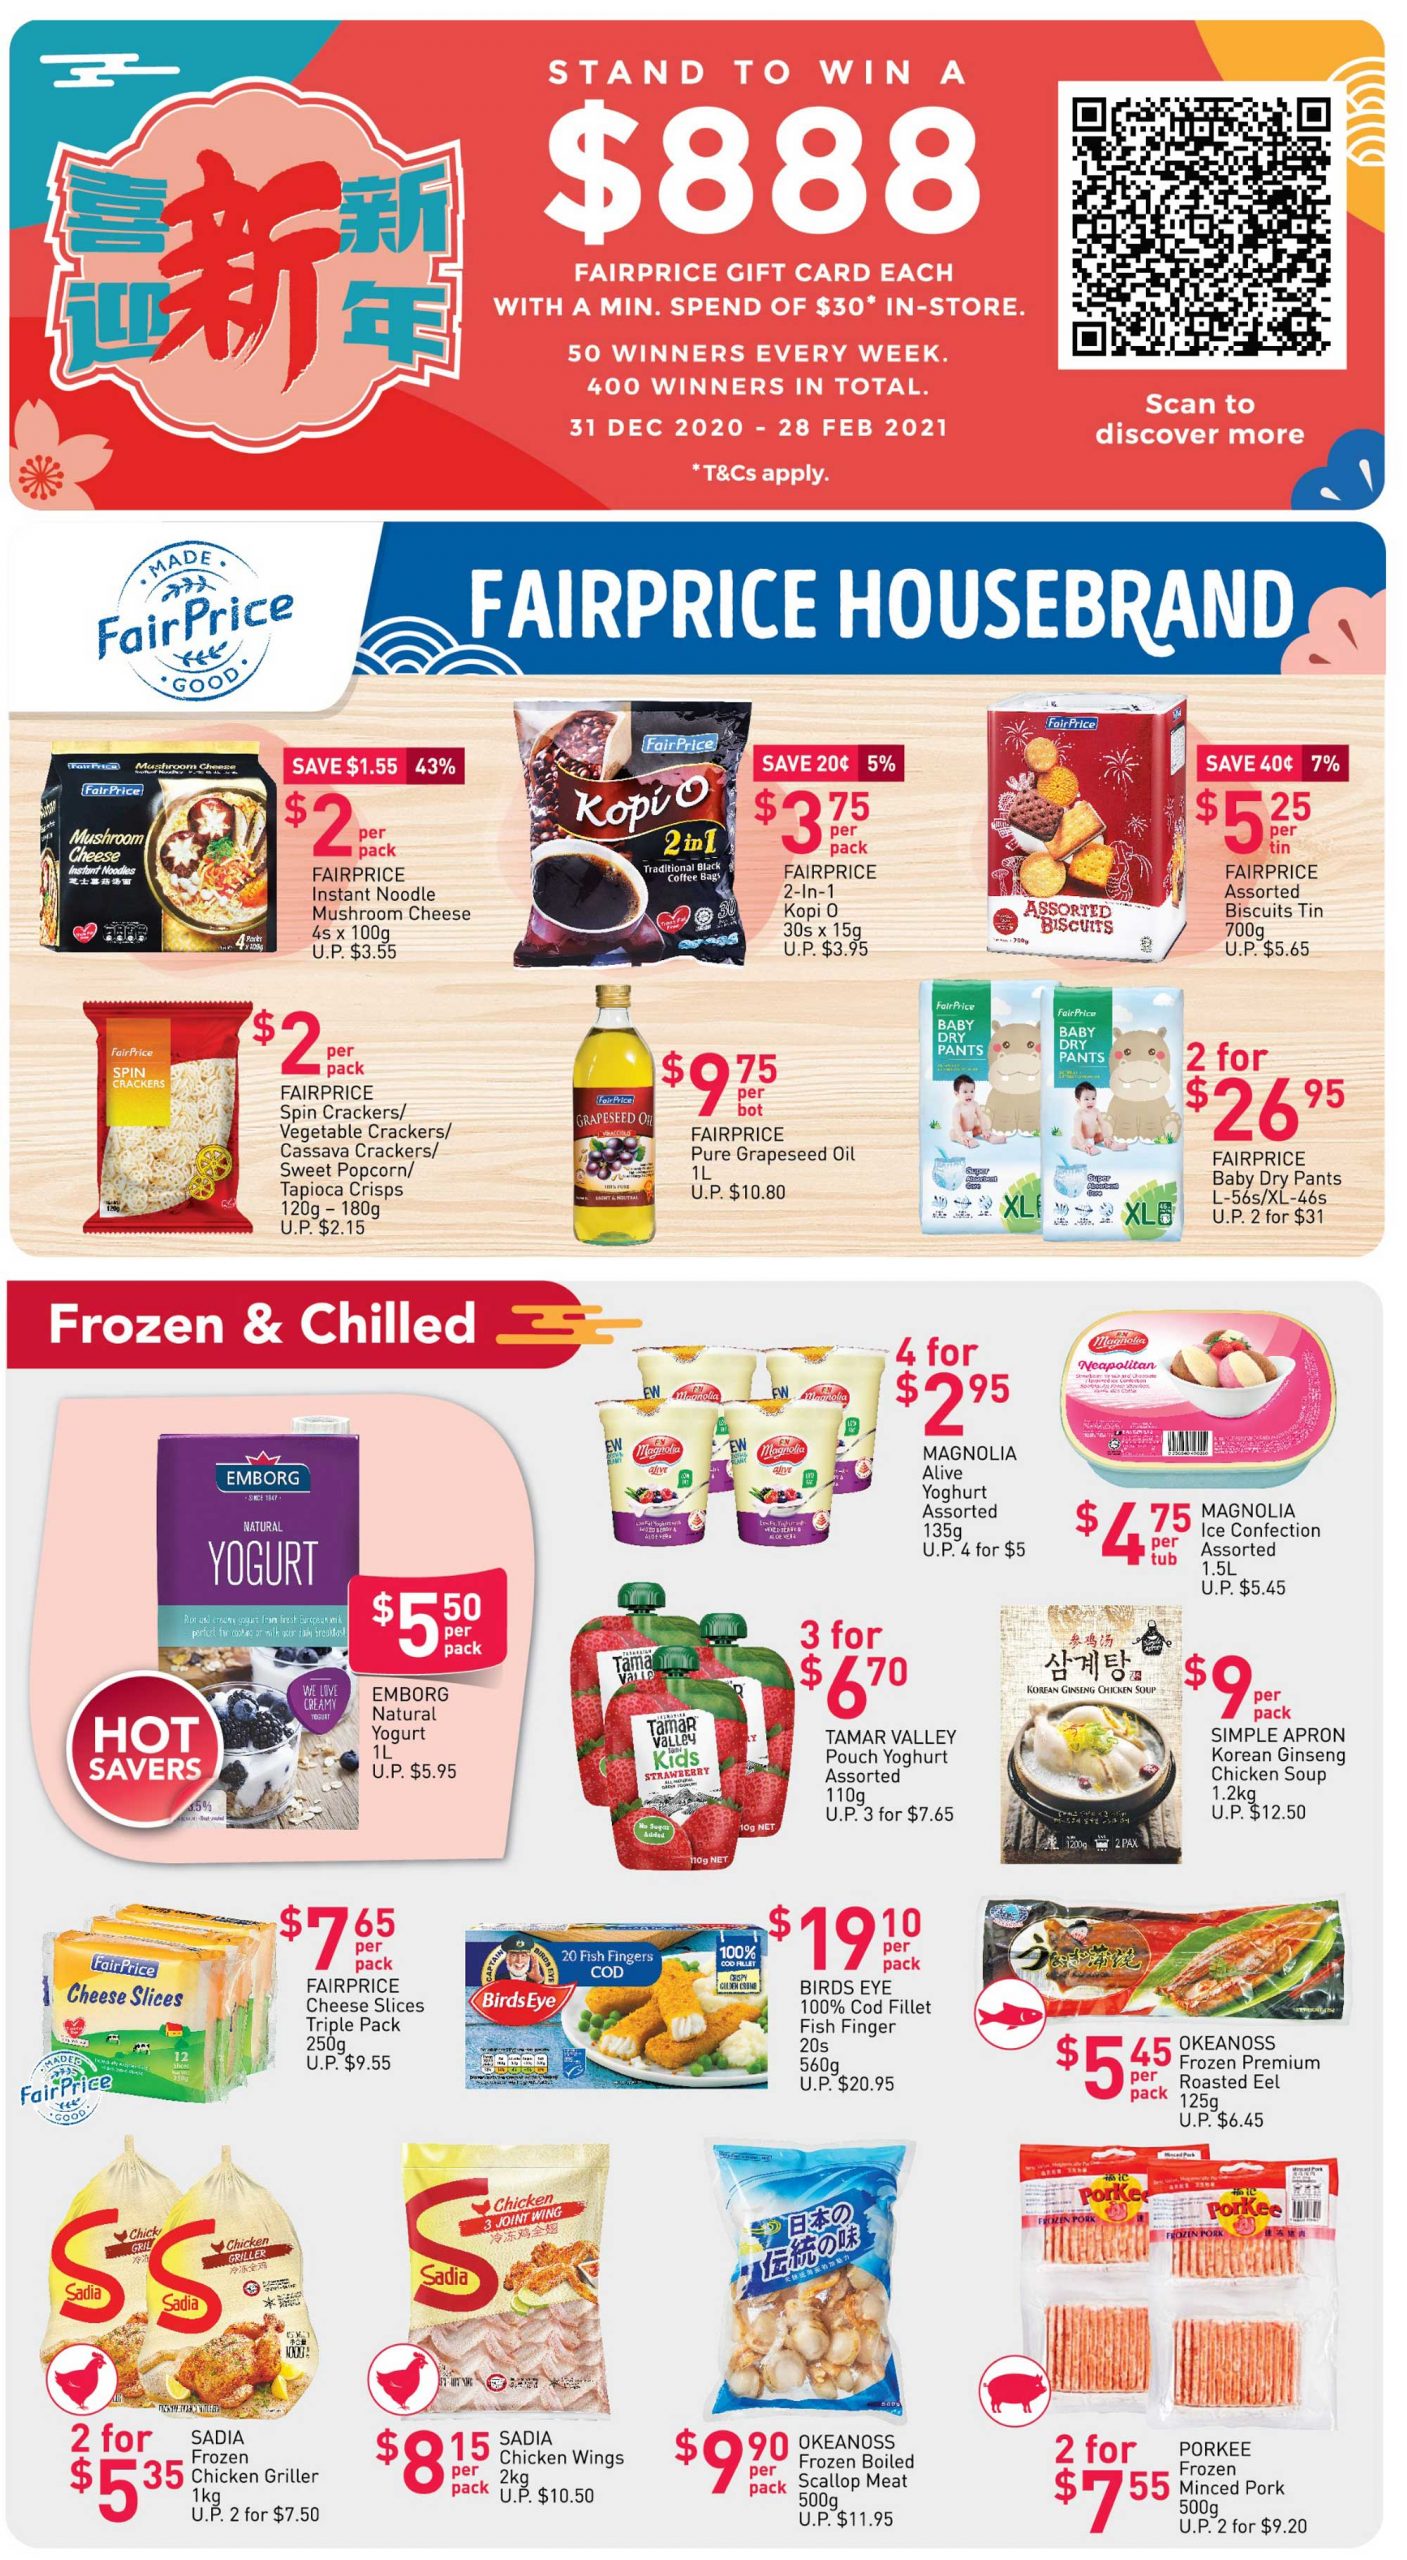 FairPrice’s weekly saver deals till 6 January 2021